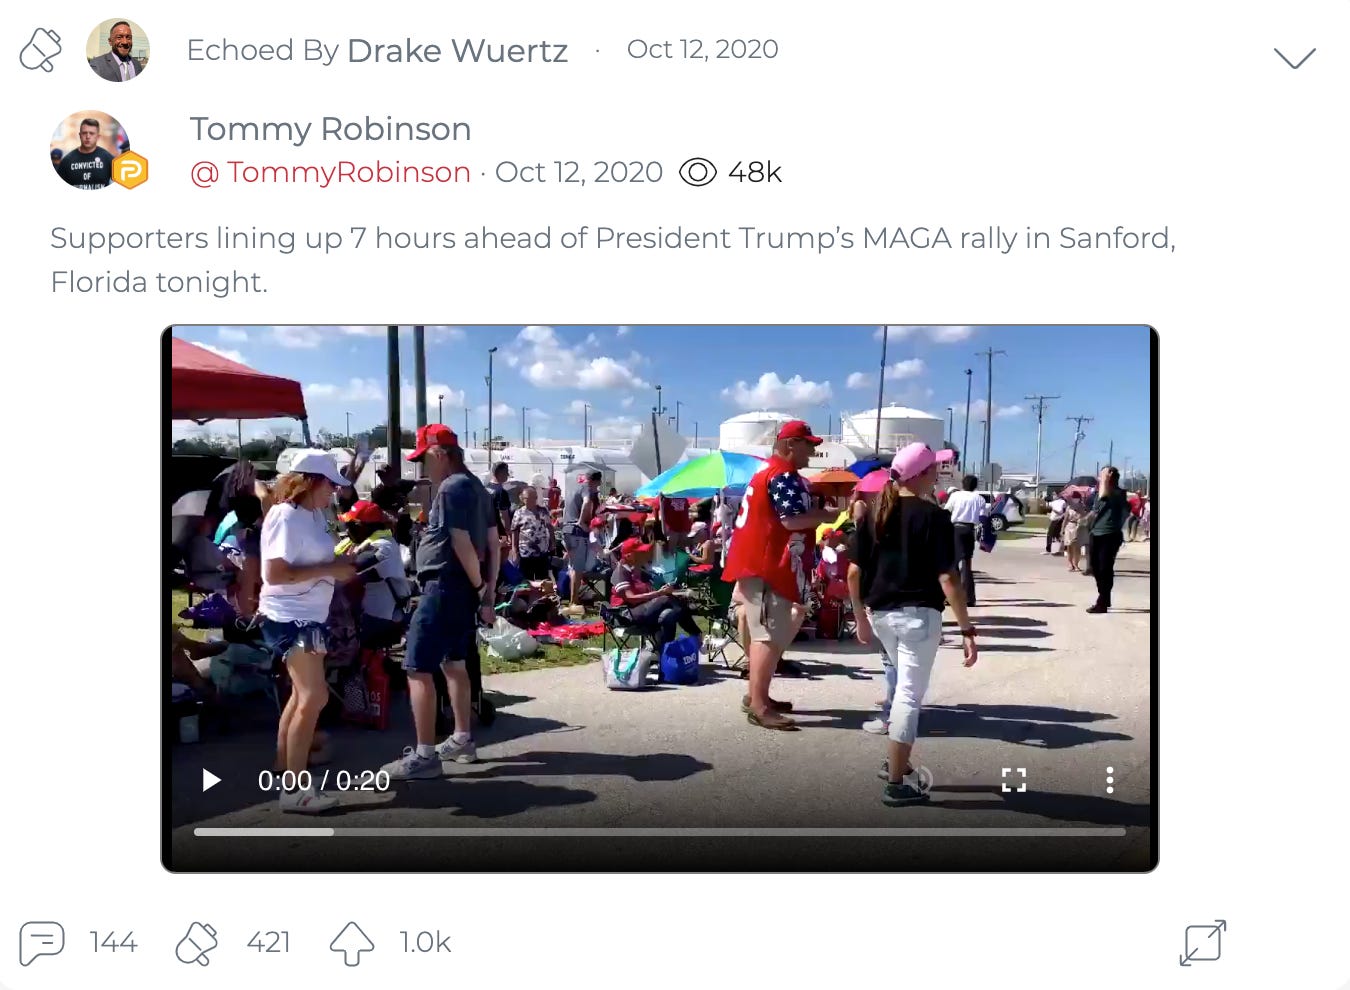 @DrakeWuertzFLA’s second “echo” of Tommy Robinson, sharing an October 12, 2020 post about a video of the line to get into a Donald Trump campaign rally in Sanford, Florida. (Image: Parler screenshot)